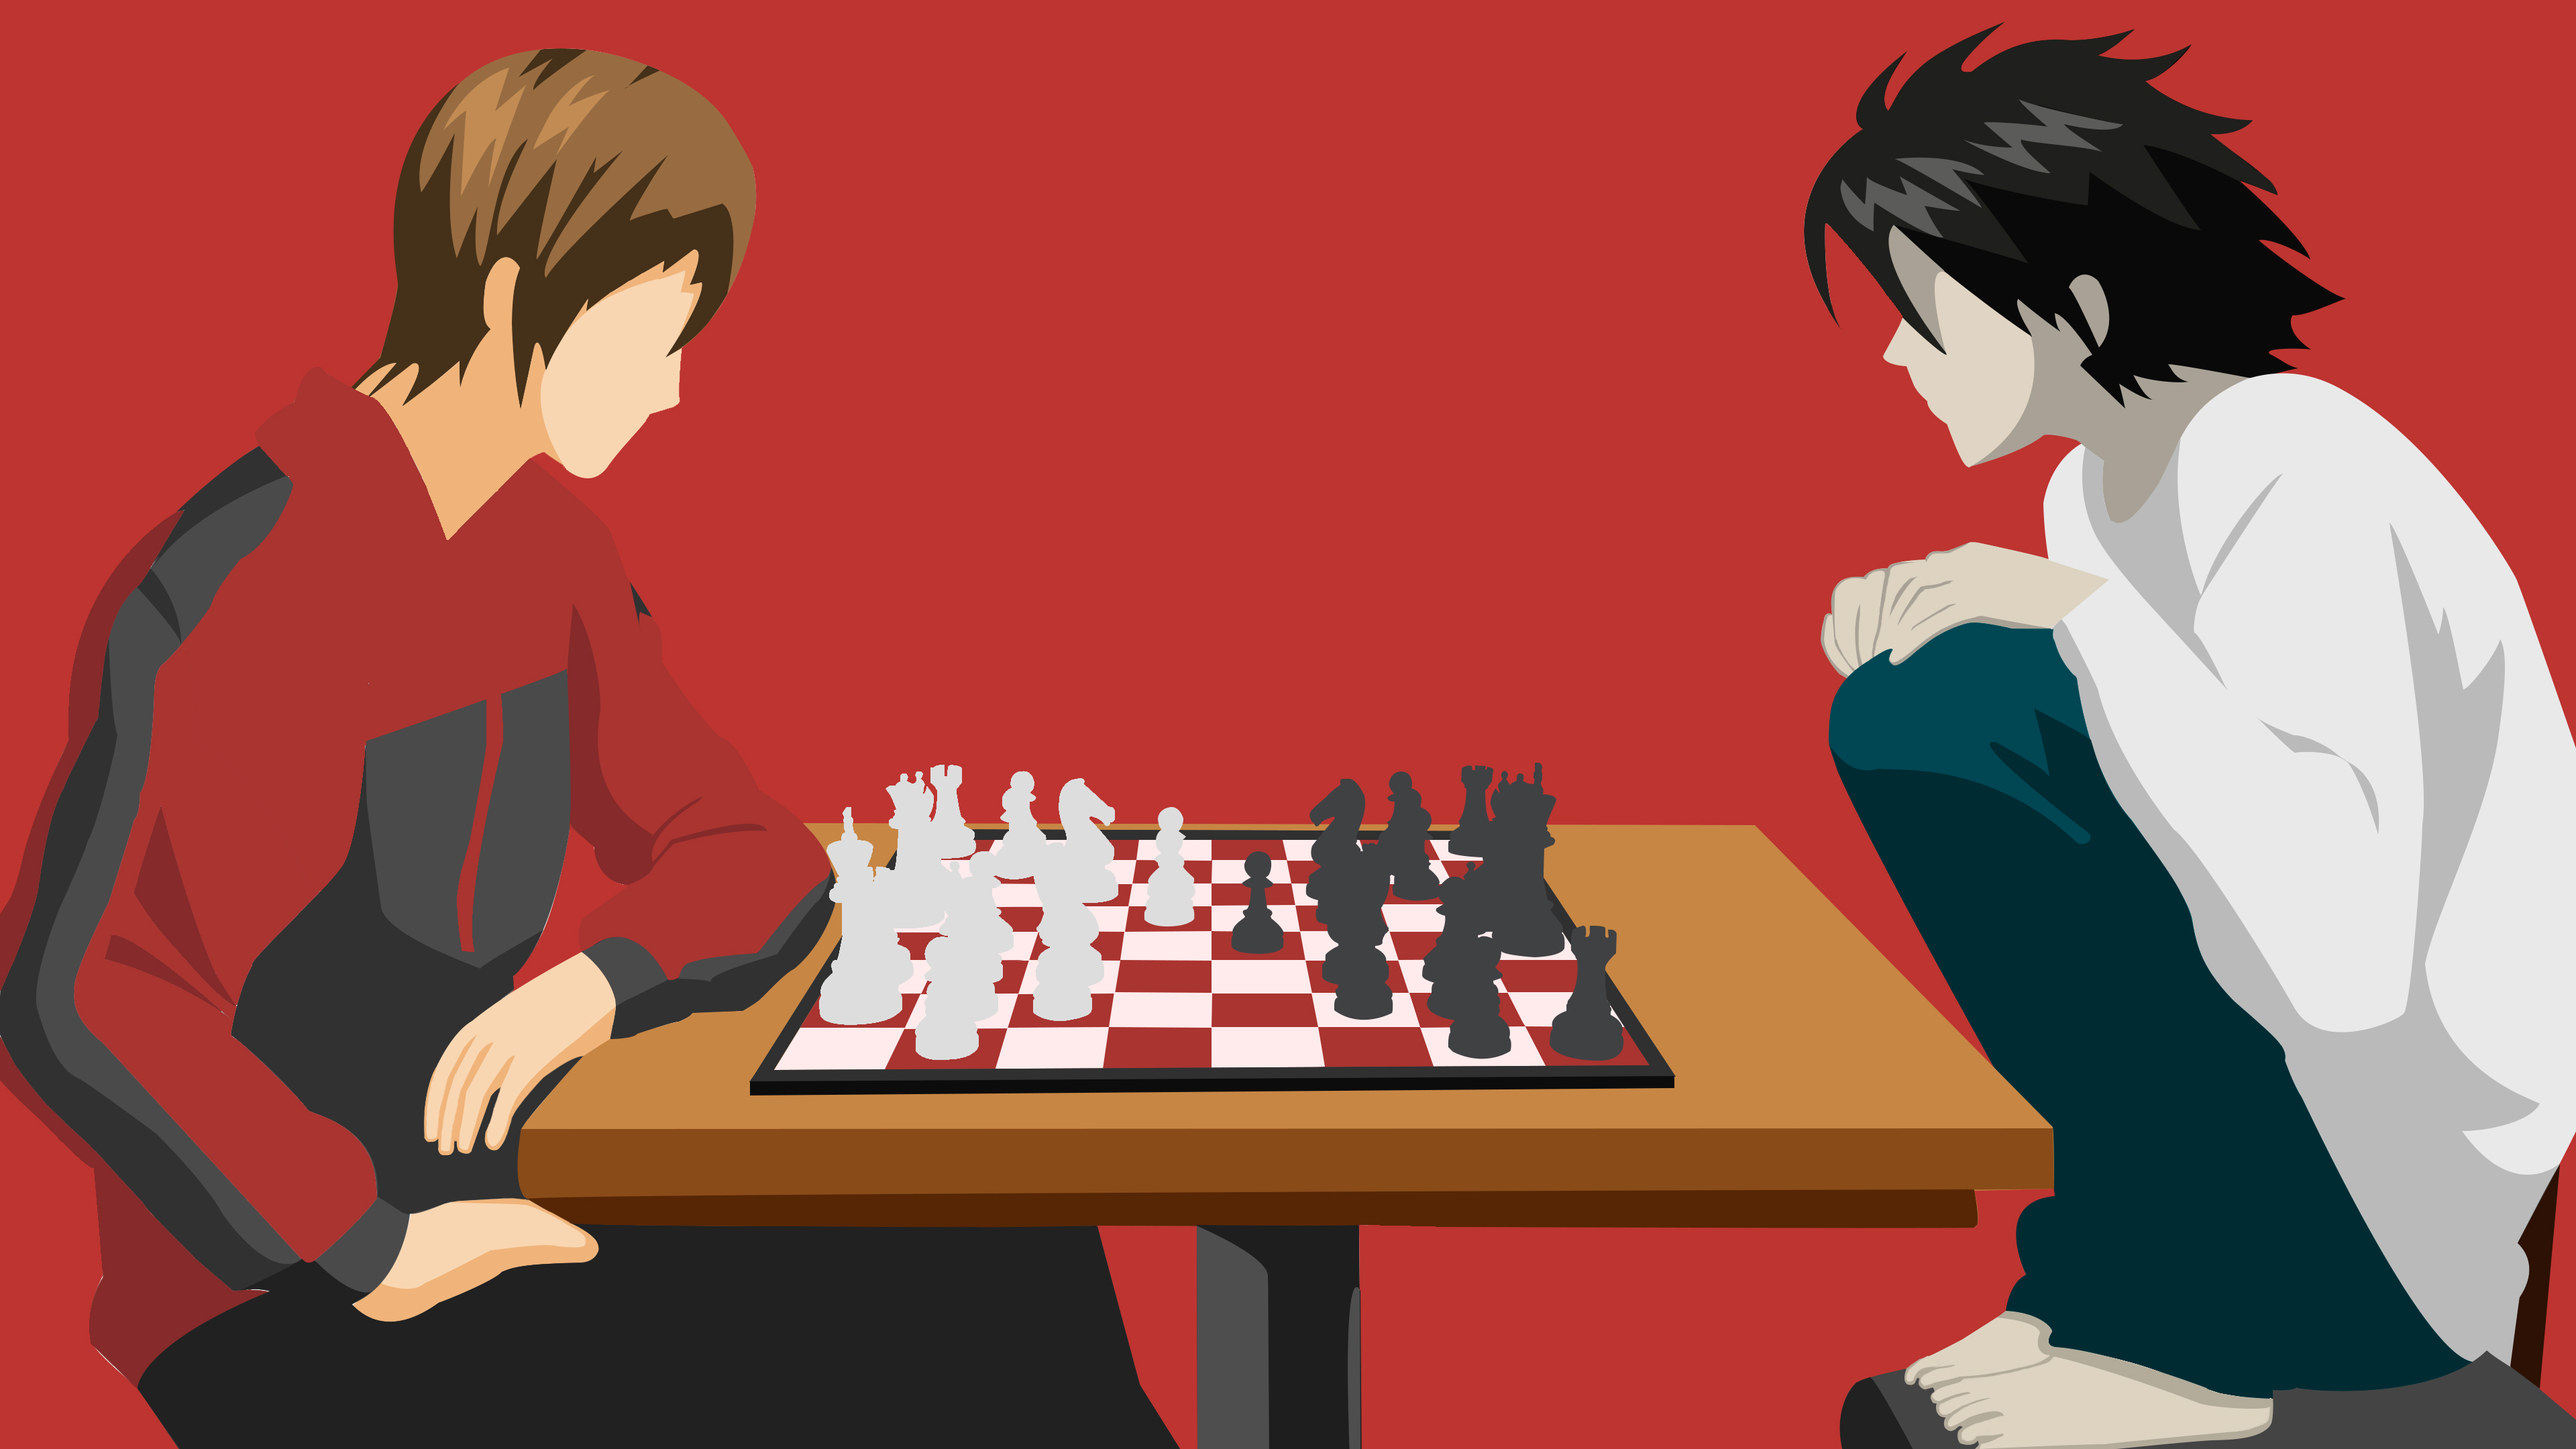 Anime Character on Chess Board